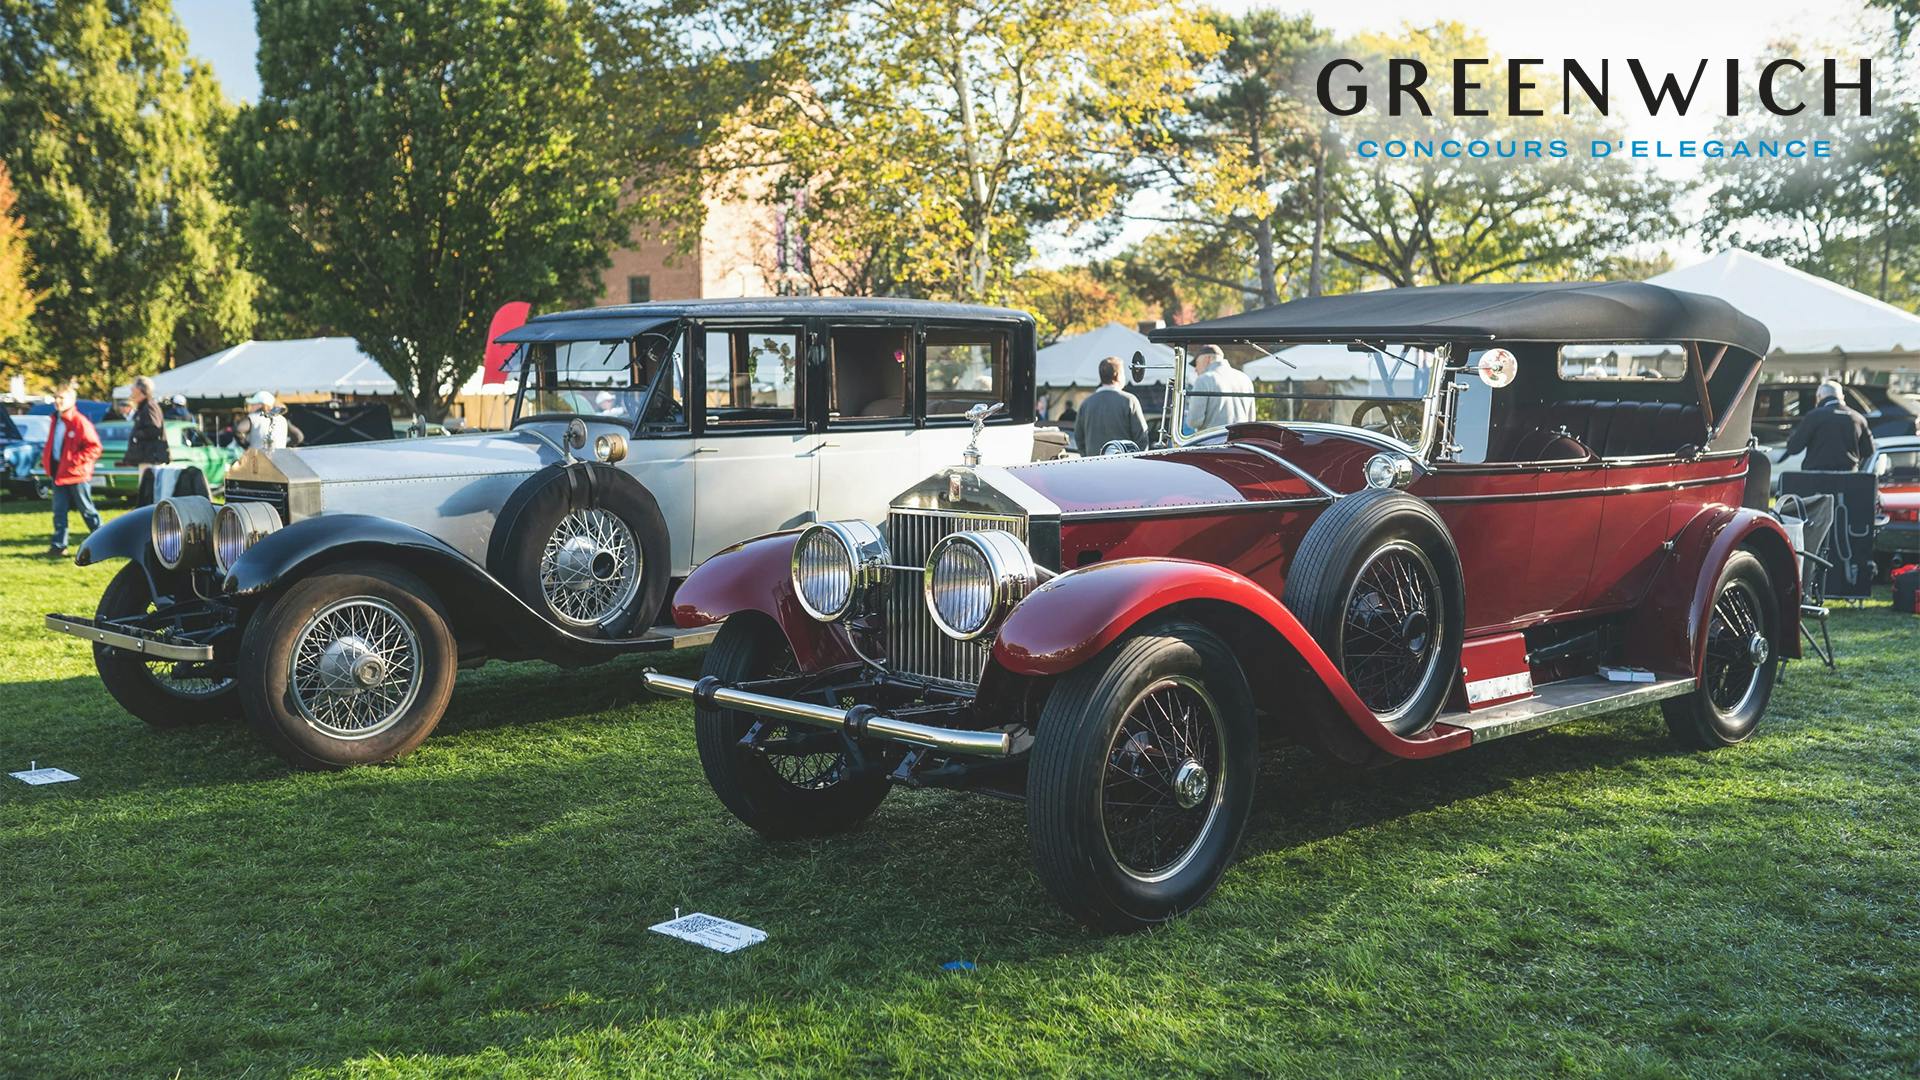 2022 Greenwich Concours d’Elegance Awards Ceremony